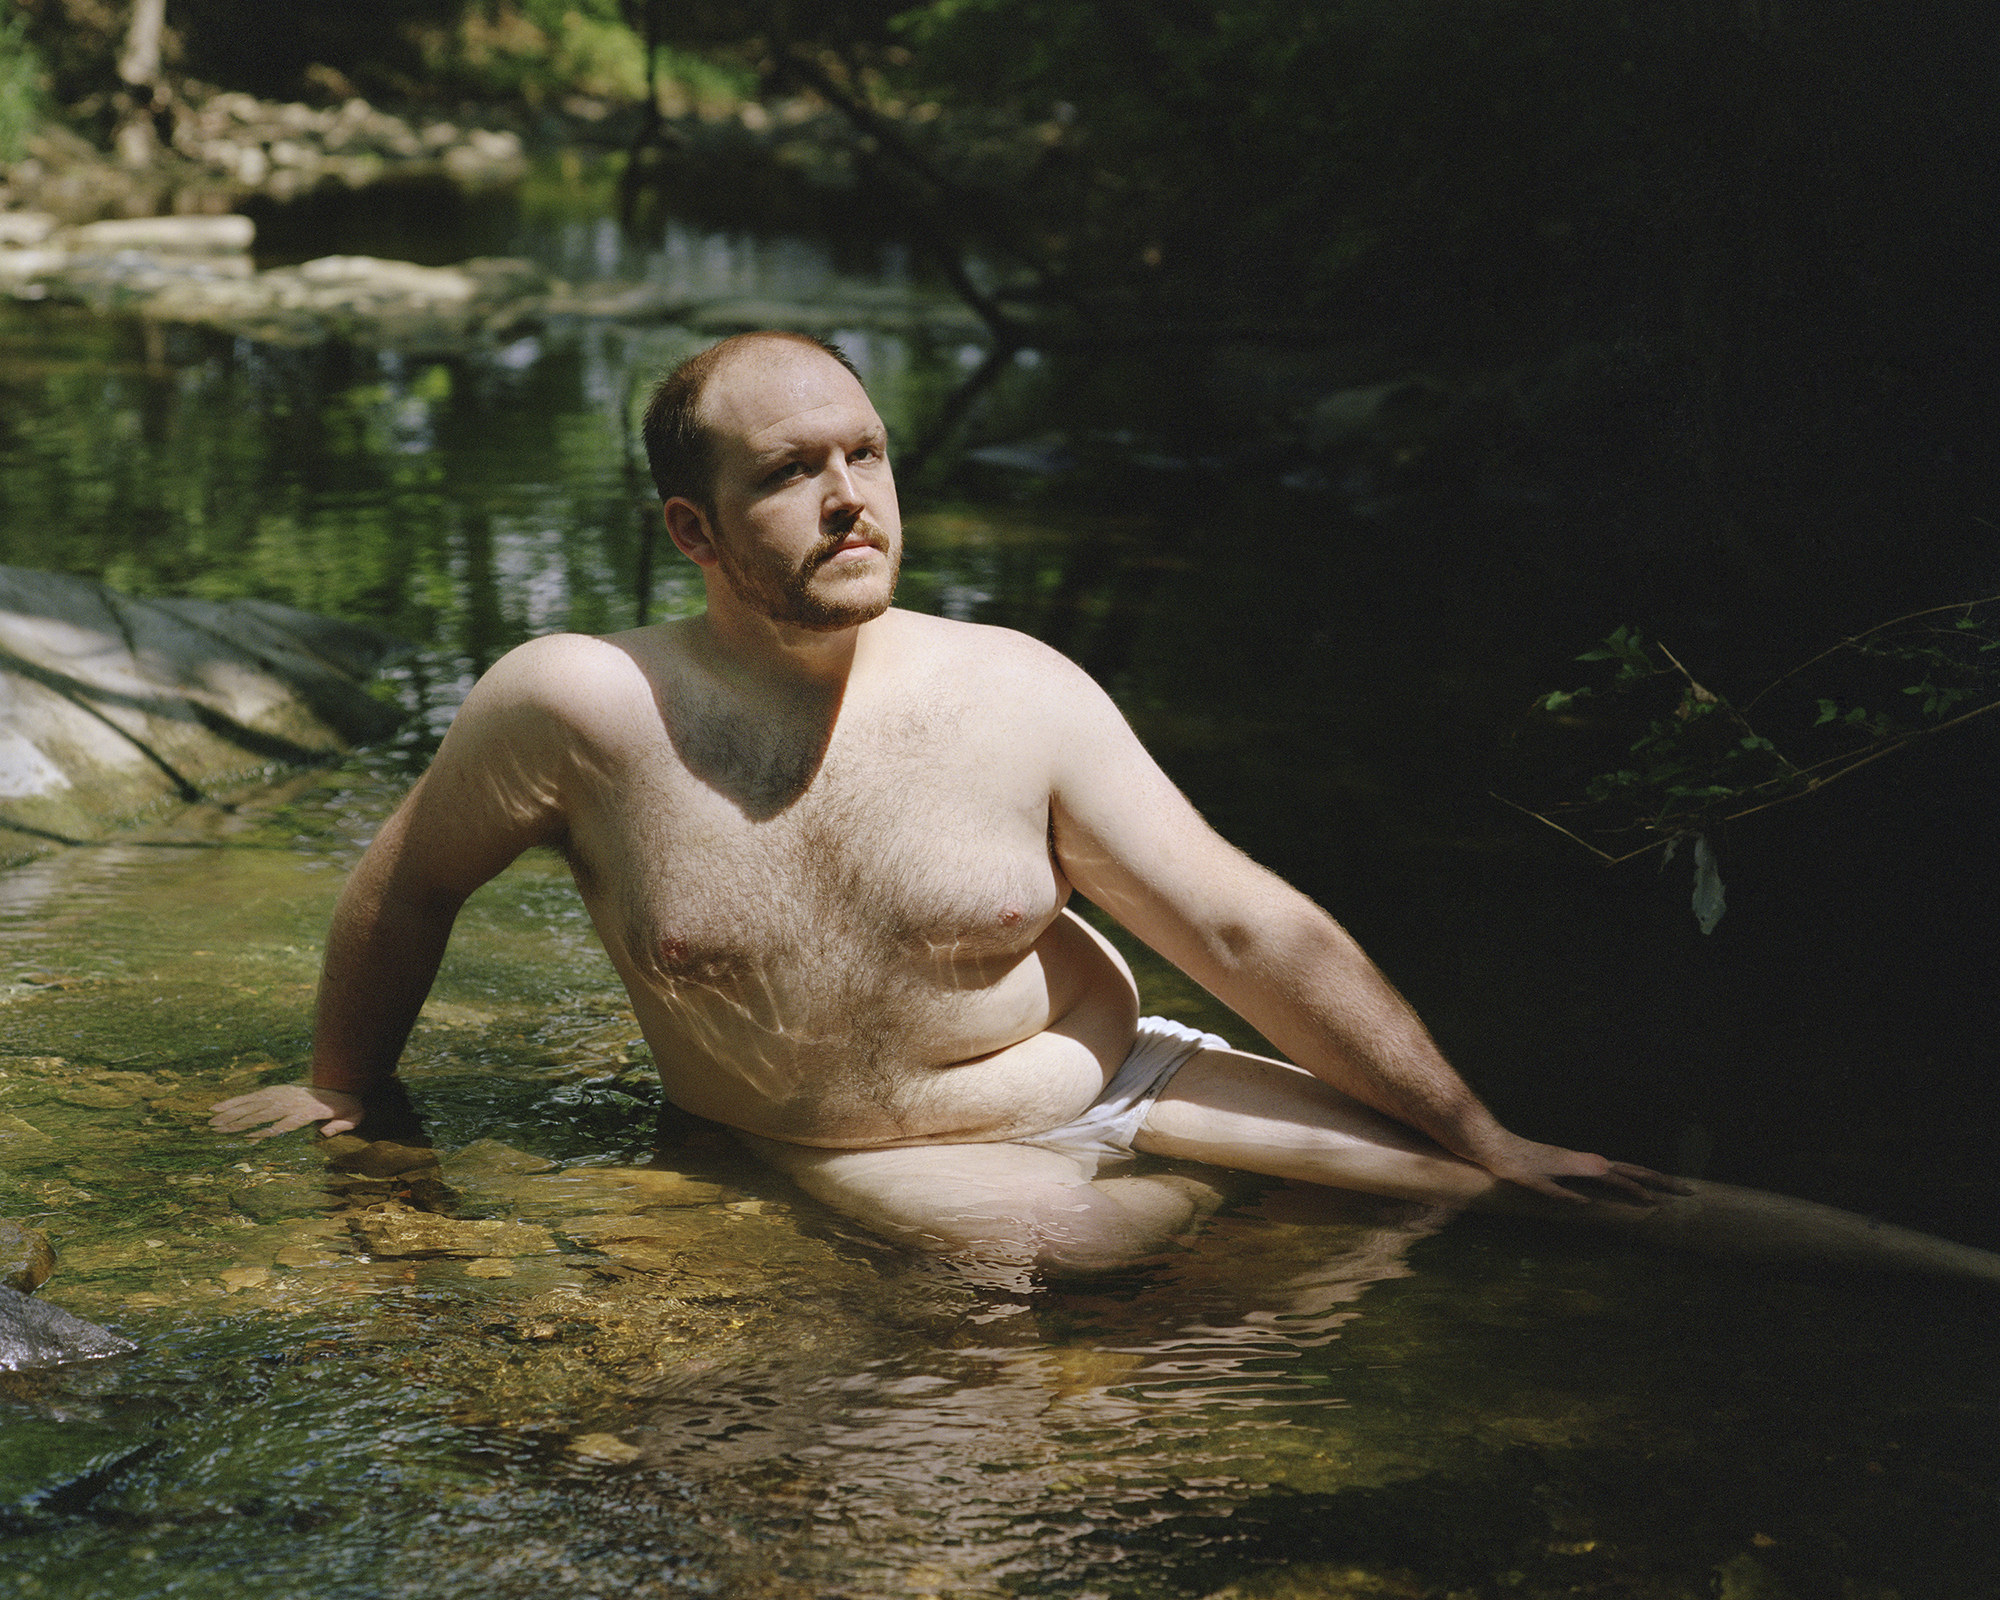 a person sits in their underwear in a rocky stream, looking at the camera